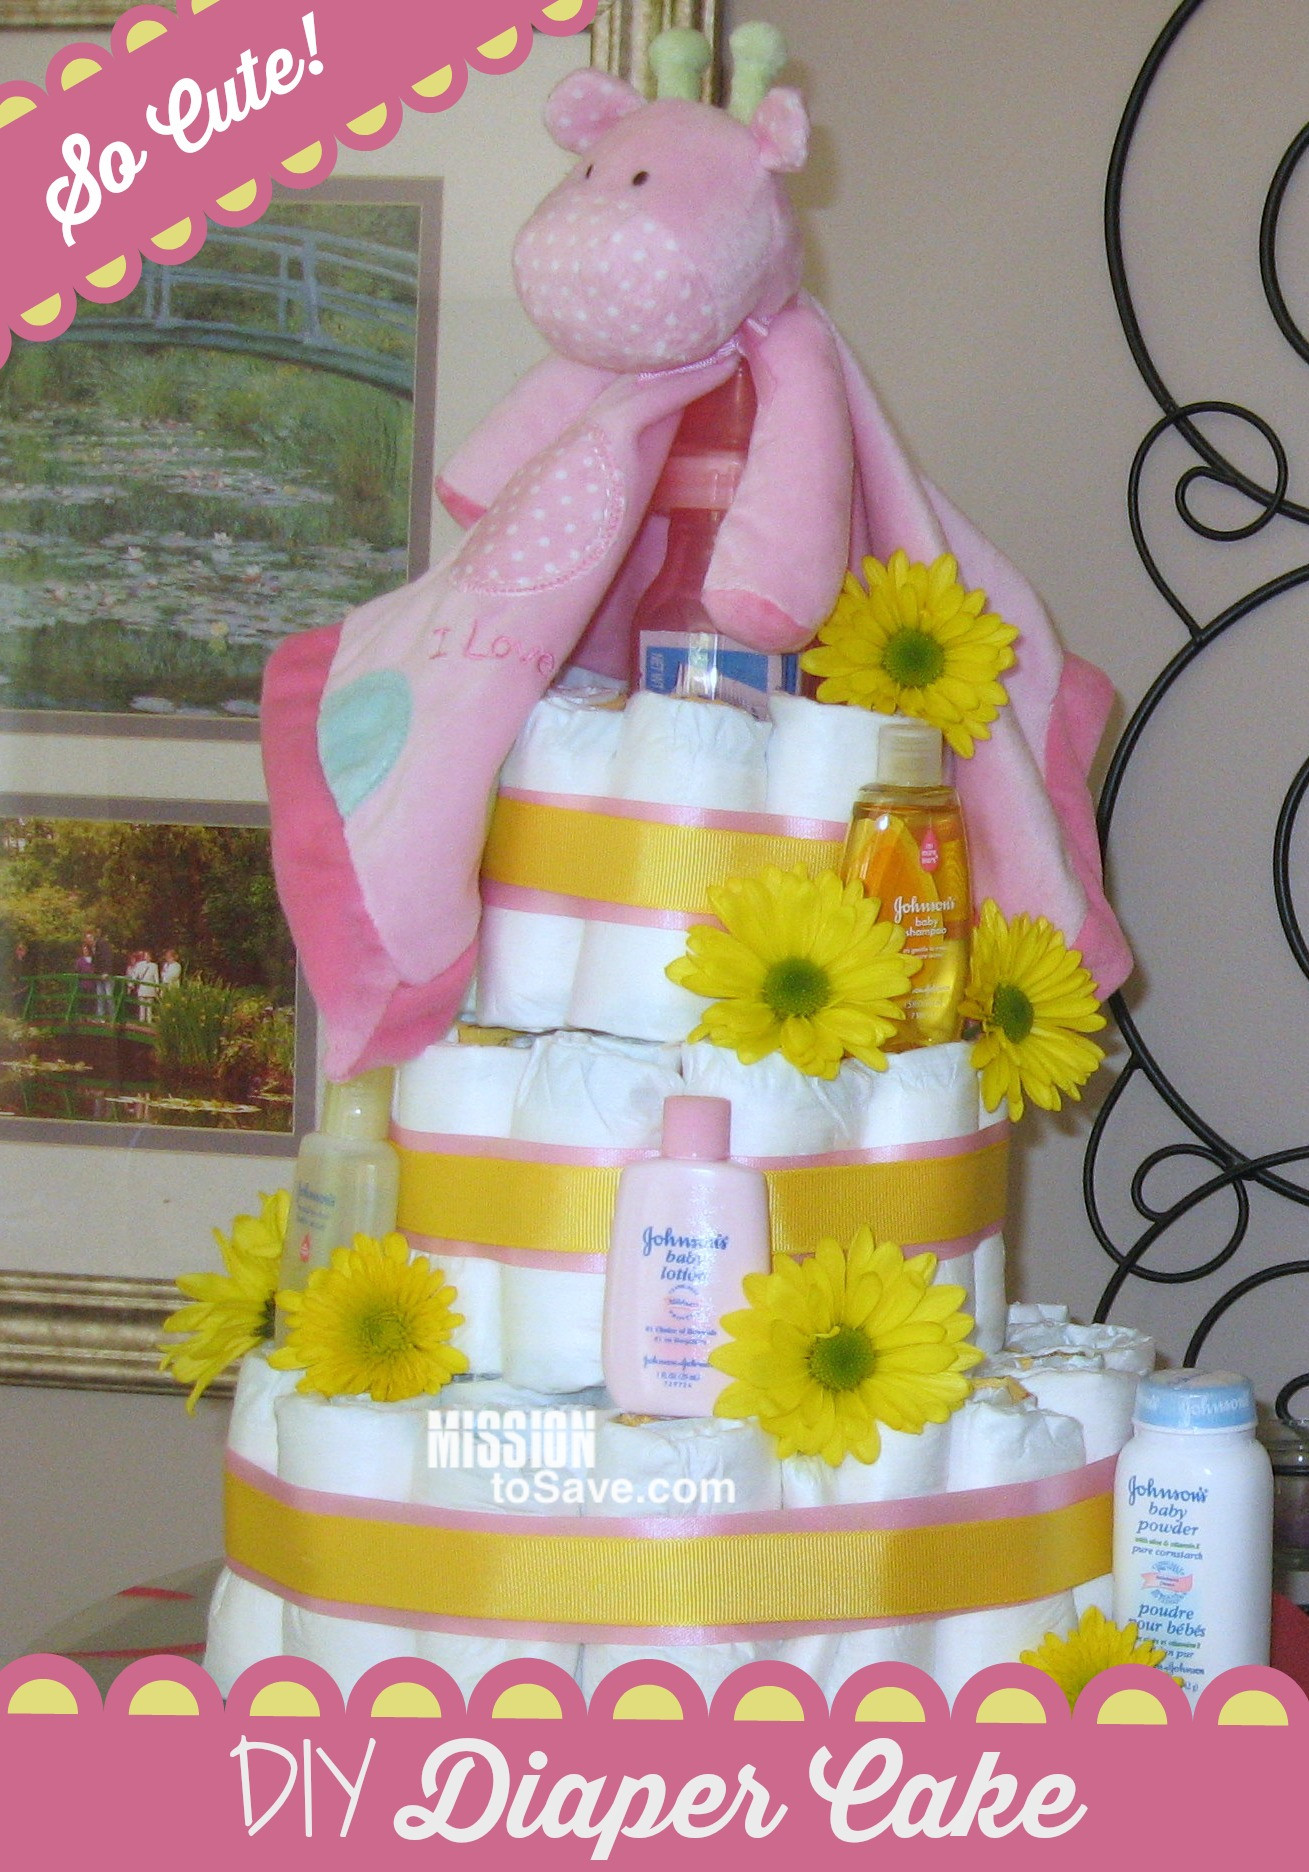 Diy Baby Shower Diaper Cakes
 Adorable Diaper Cake for DIY Baby Shower Gift Mission